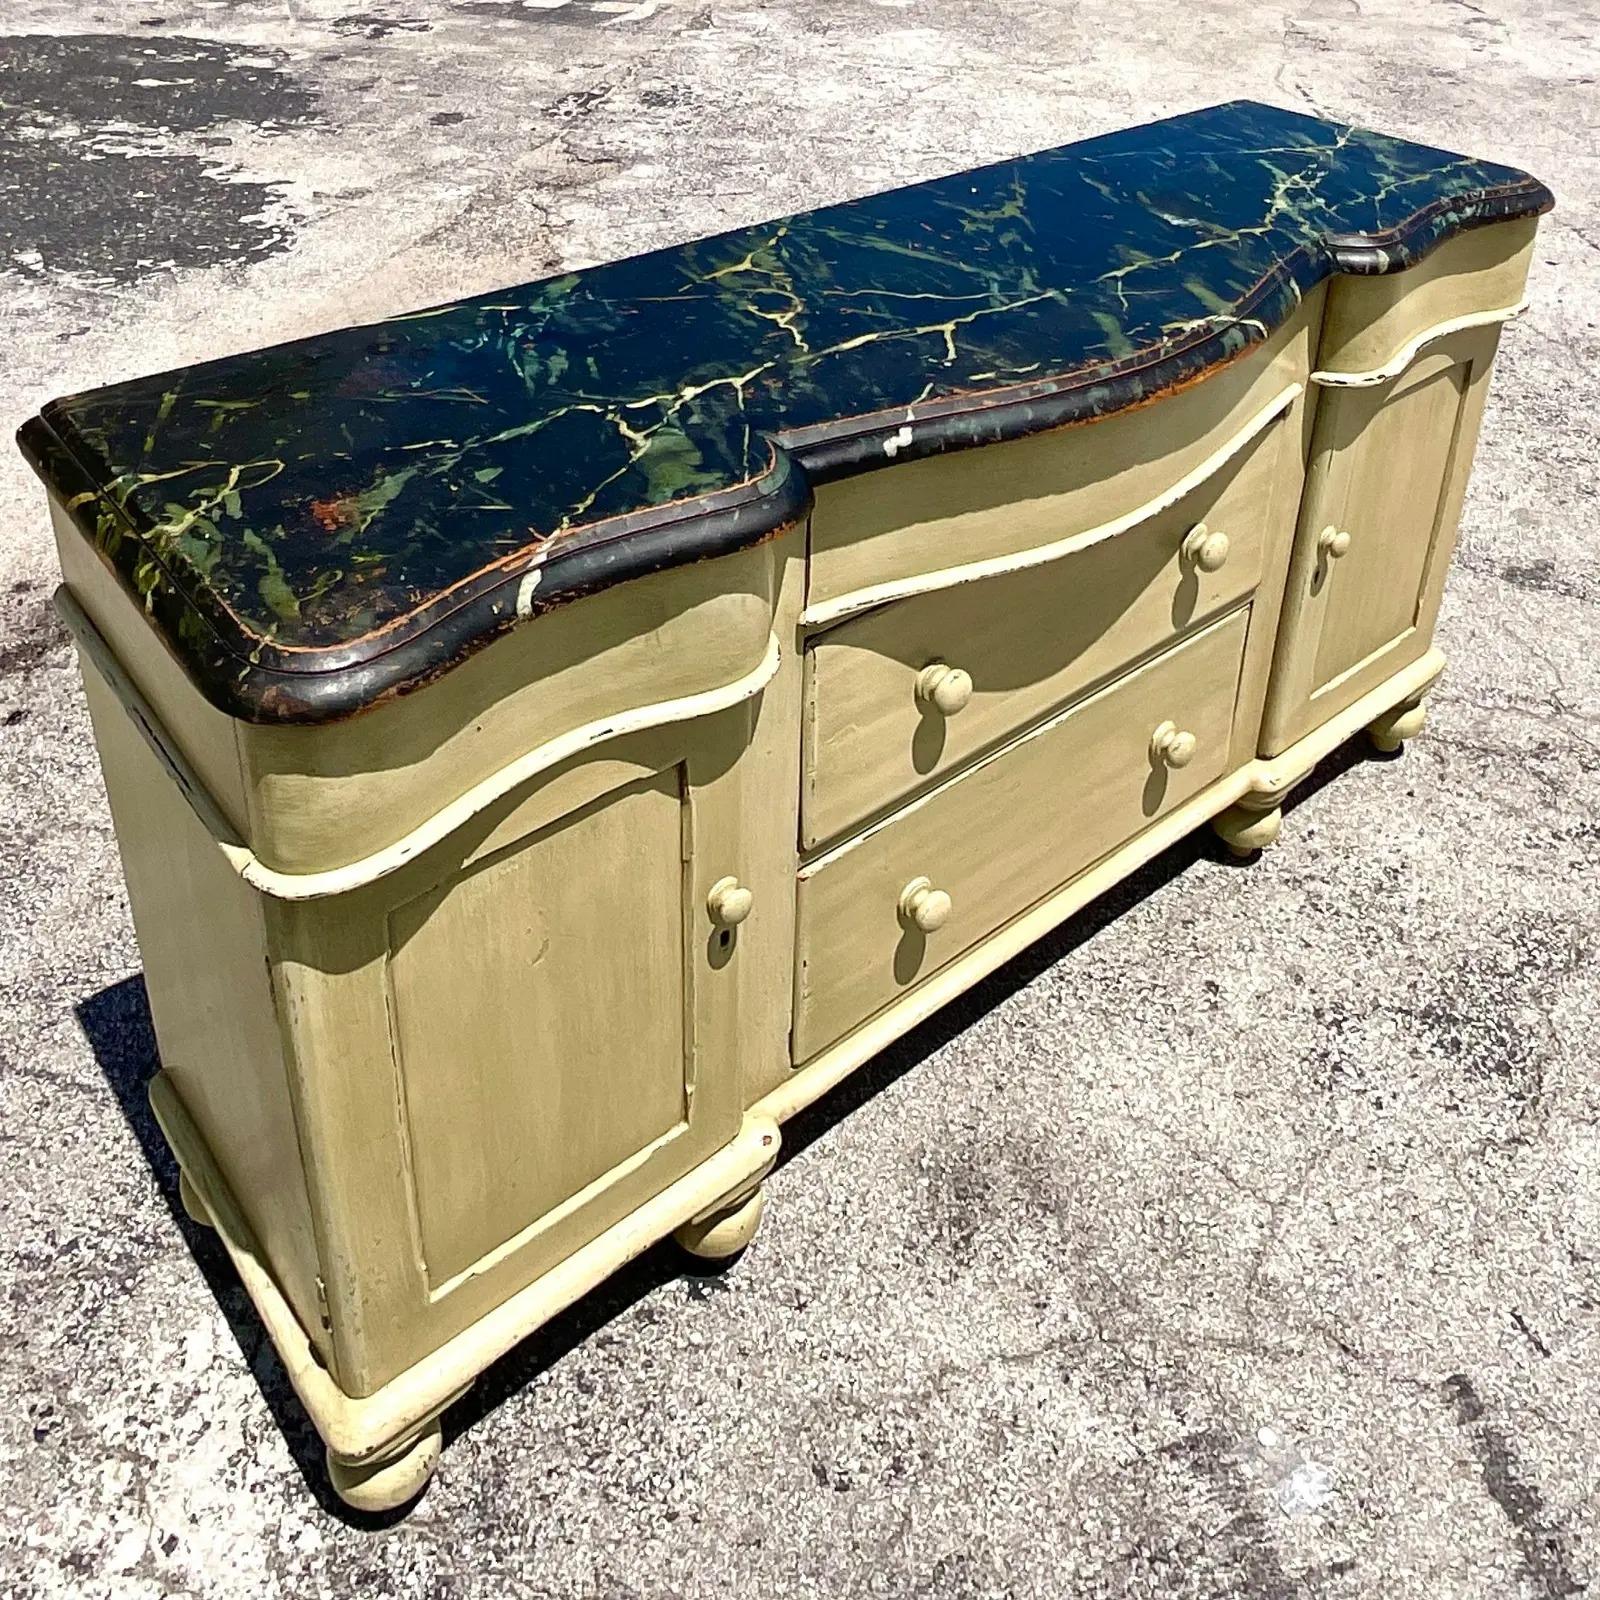 A stunning vintage Regency credenza. A chic wave front design with the most amazing hand painted faux marble top. Beautiful deep and rich colors with the natural wood peeking through. This looks like a well loved legacy piece. Just add your styling